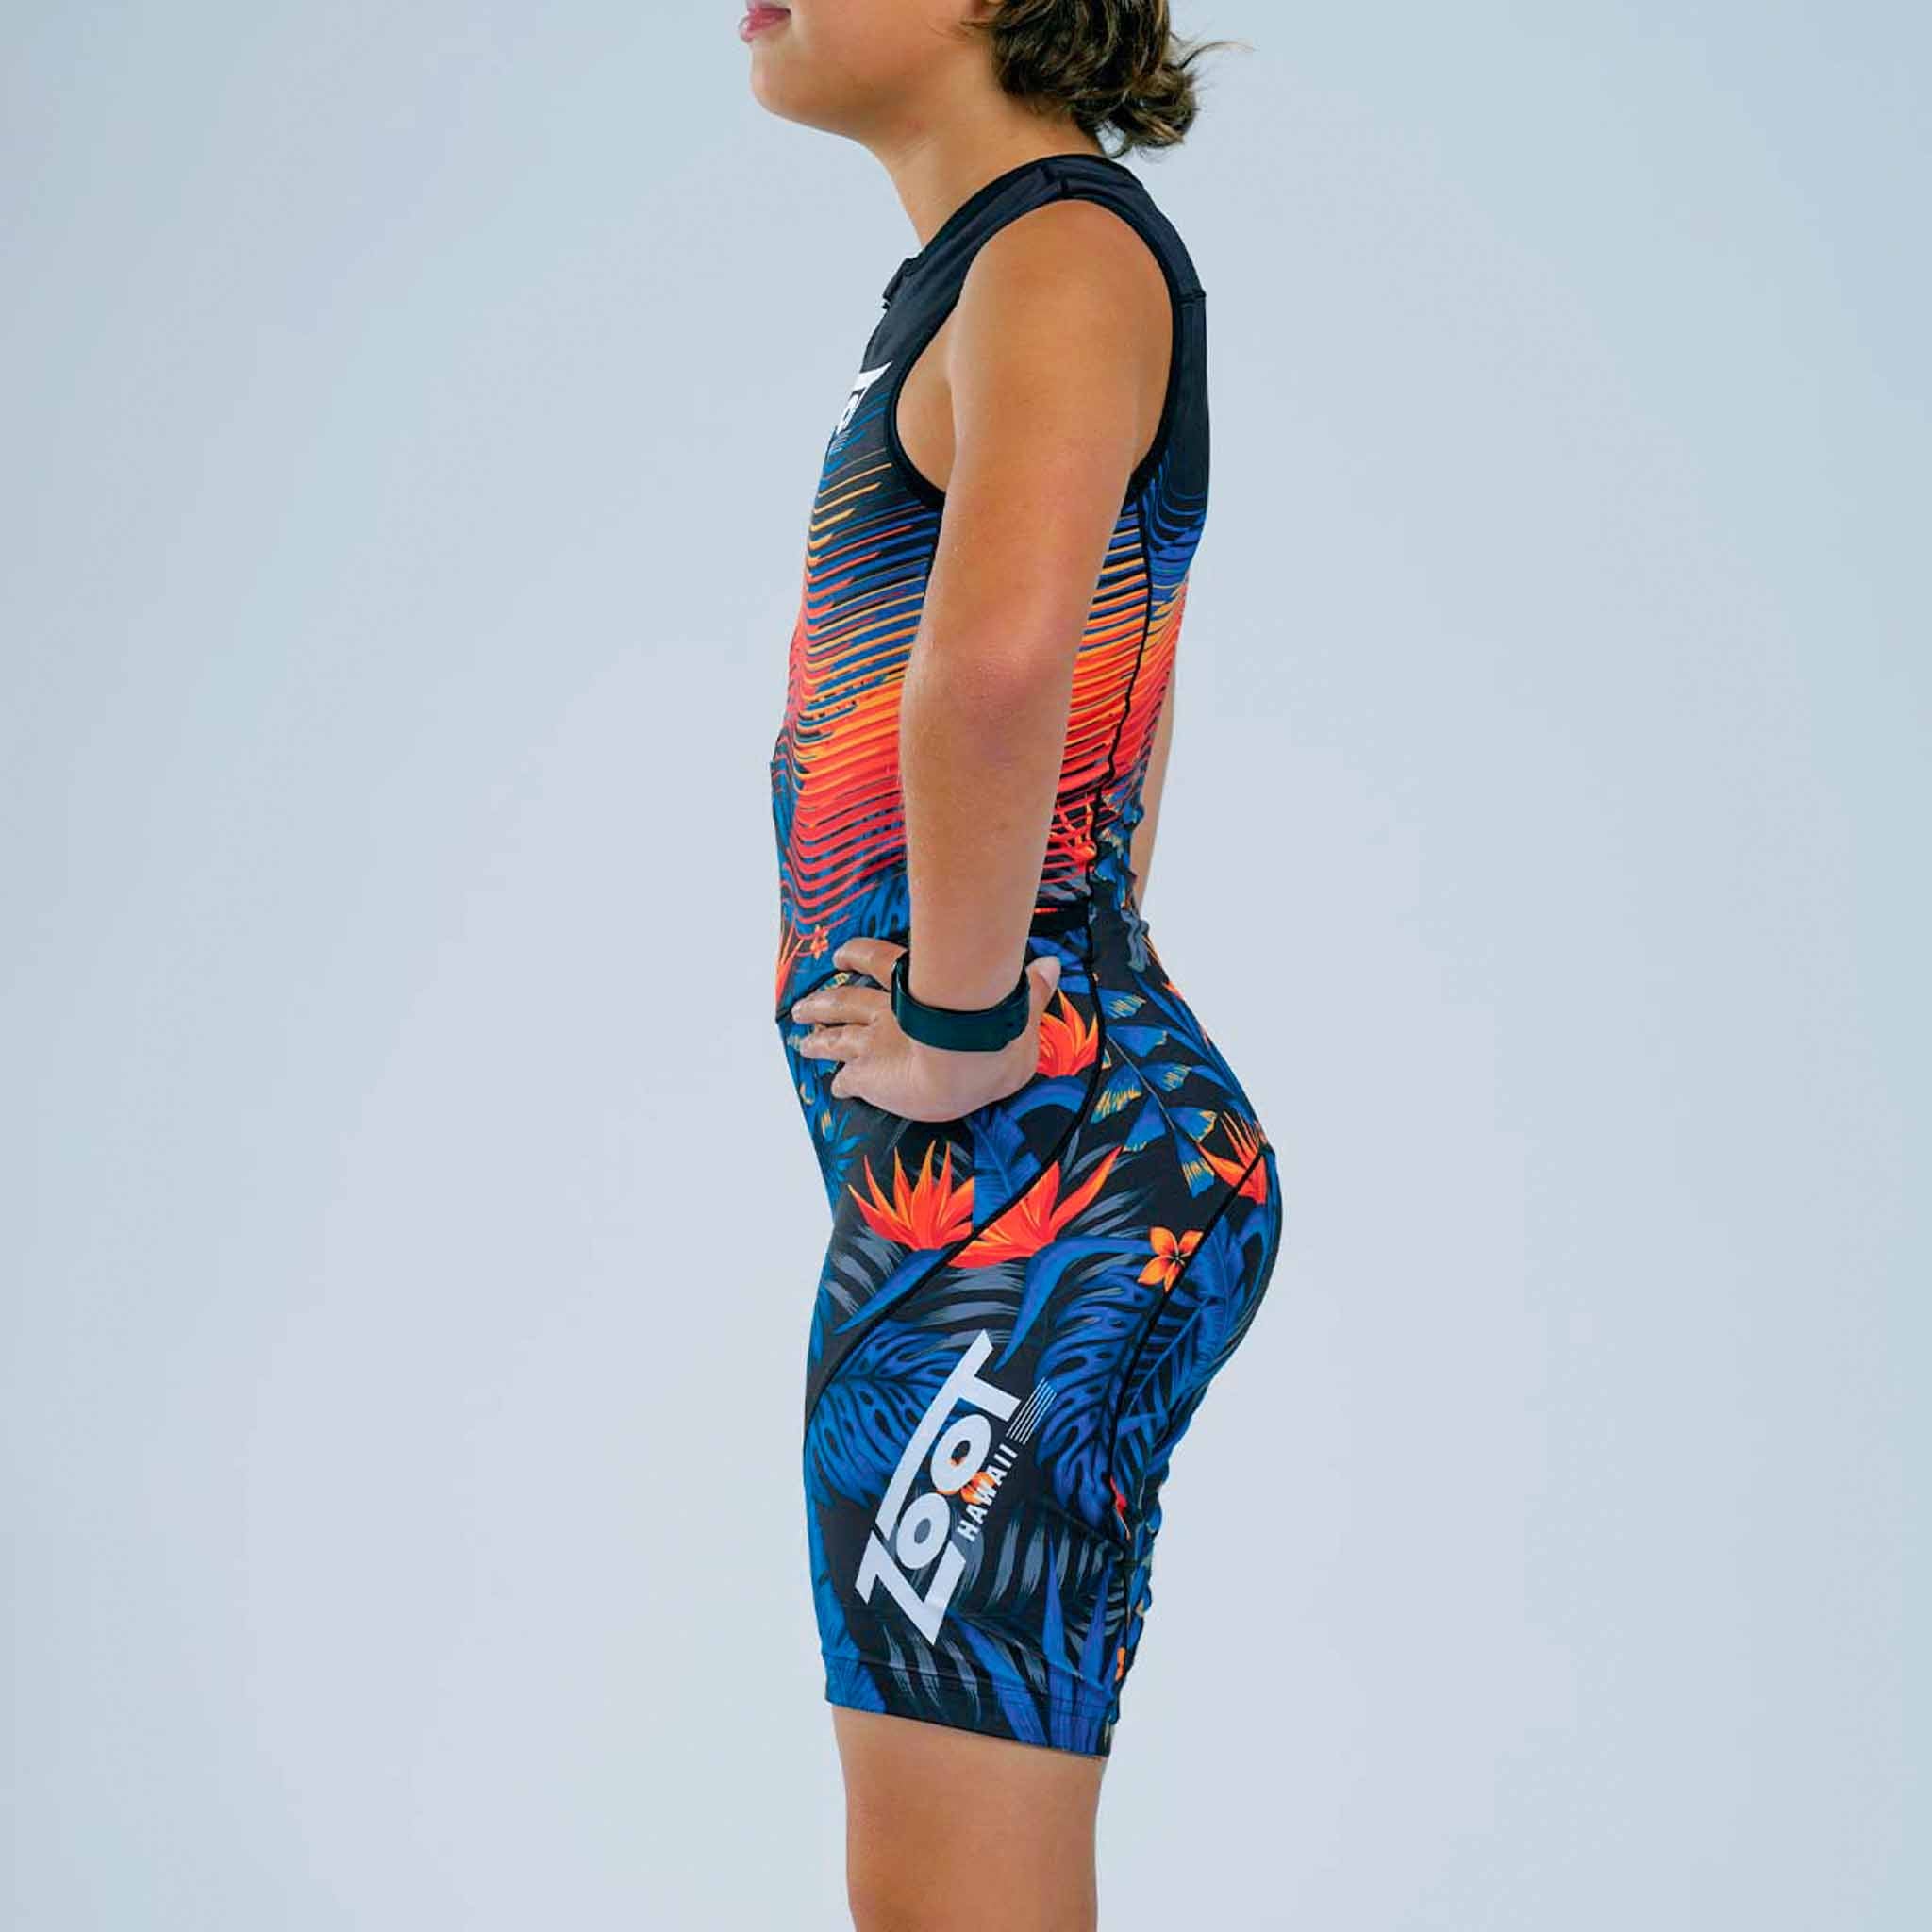 zoot-sports-kids-youth-ltd-protege-tri-racesuit-40-years-40301053083843_2048x2048